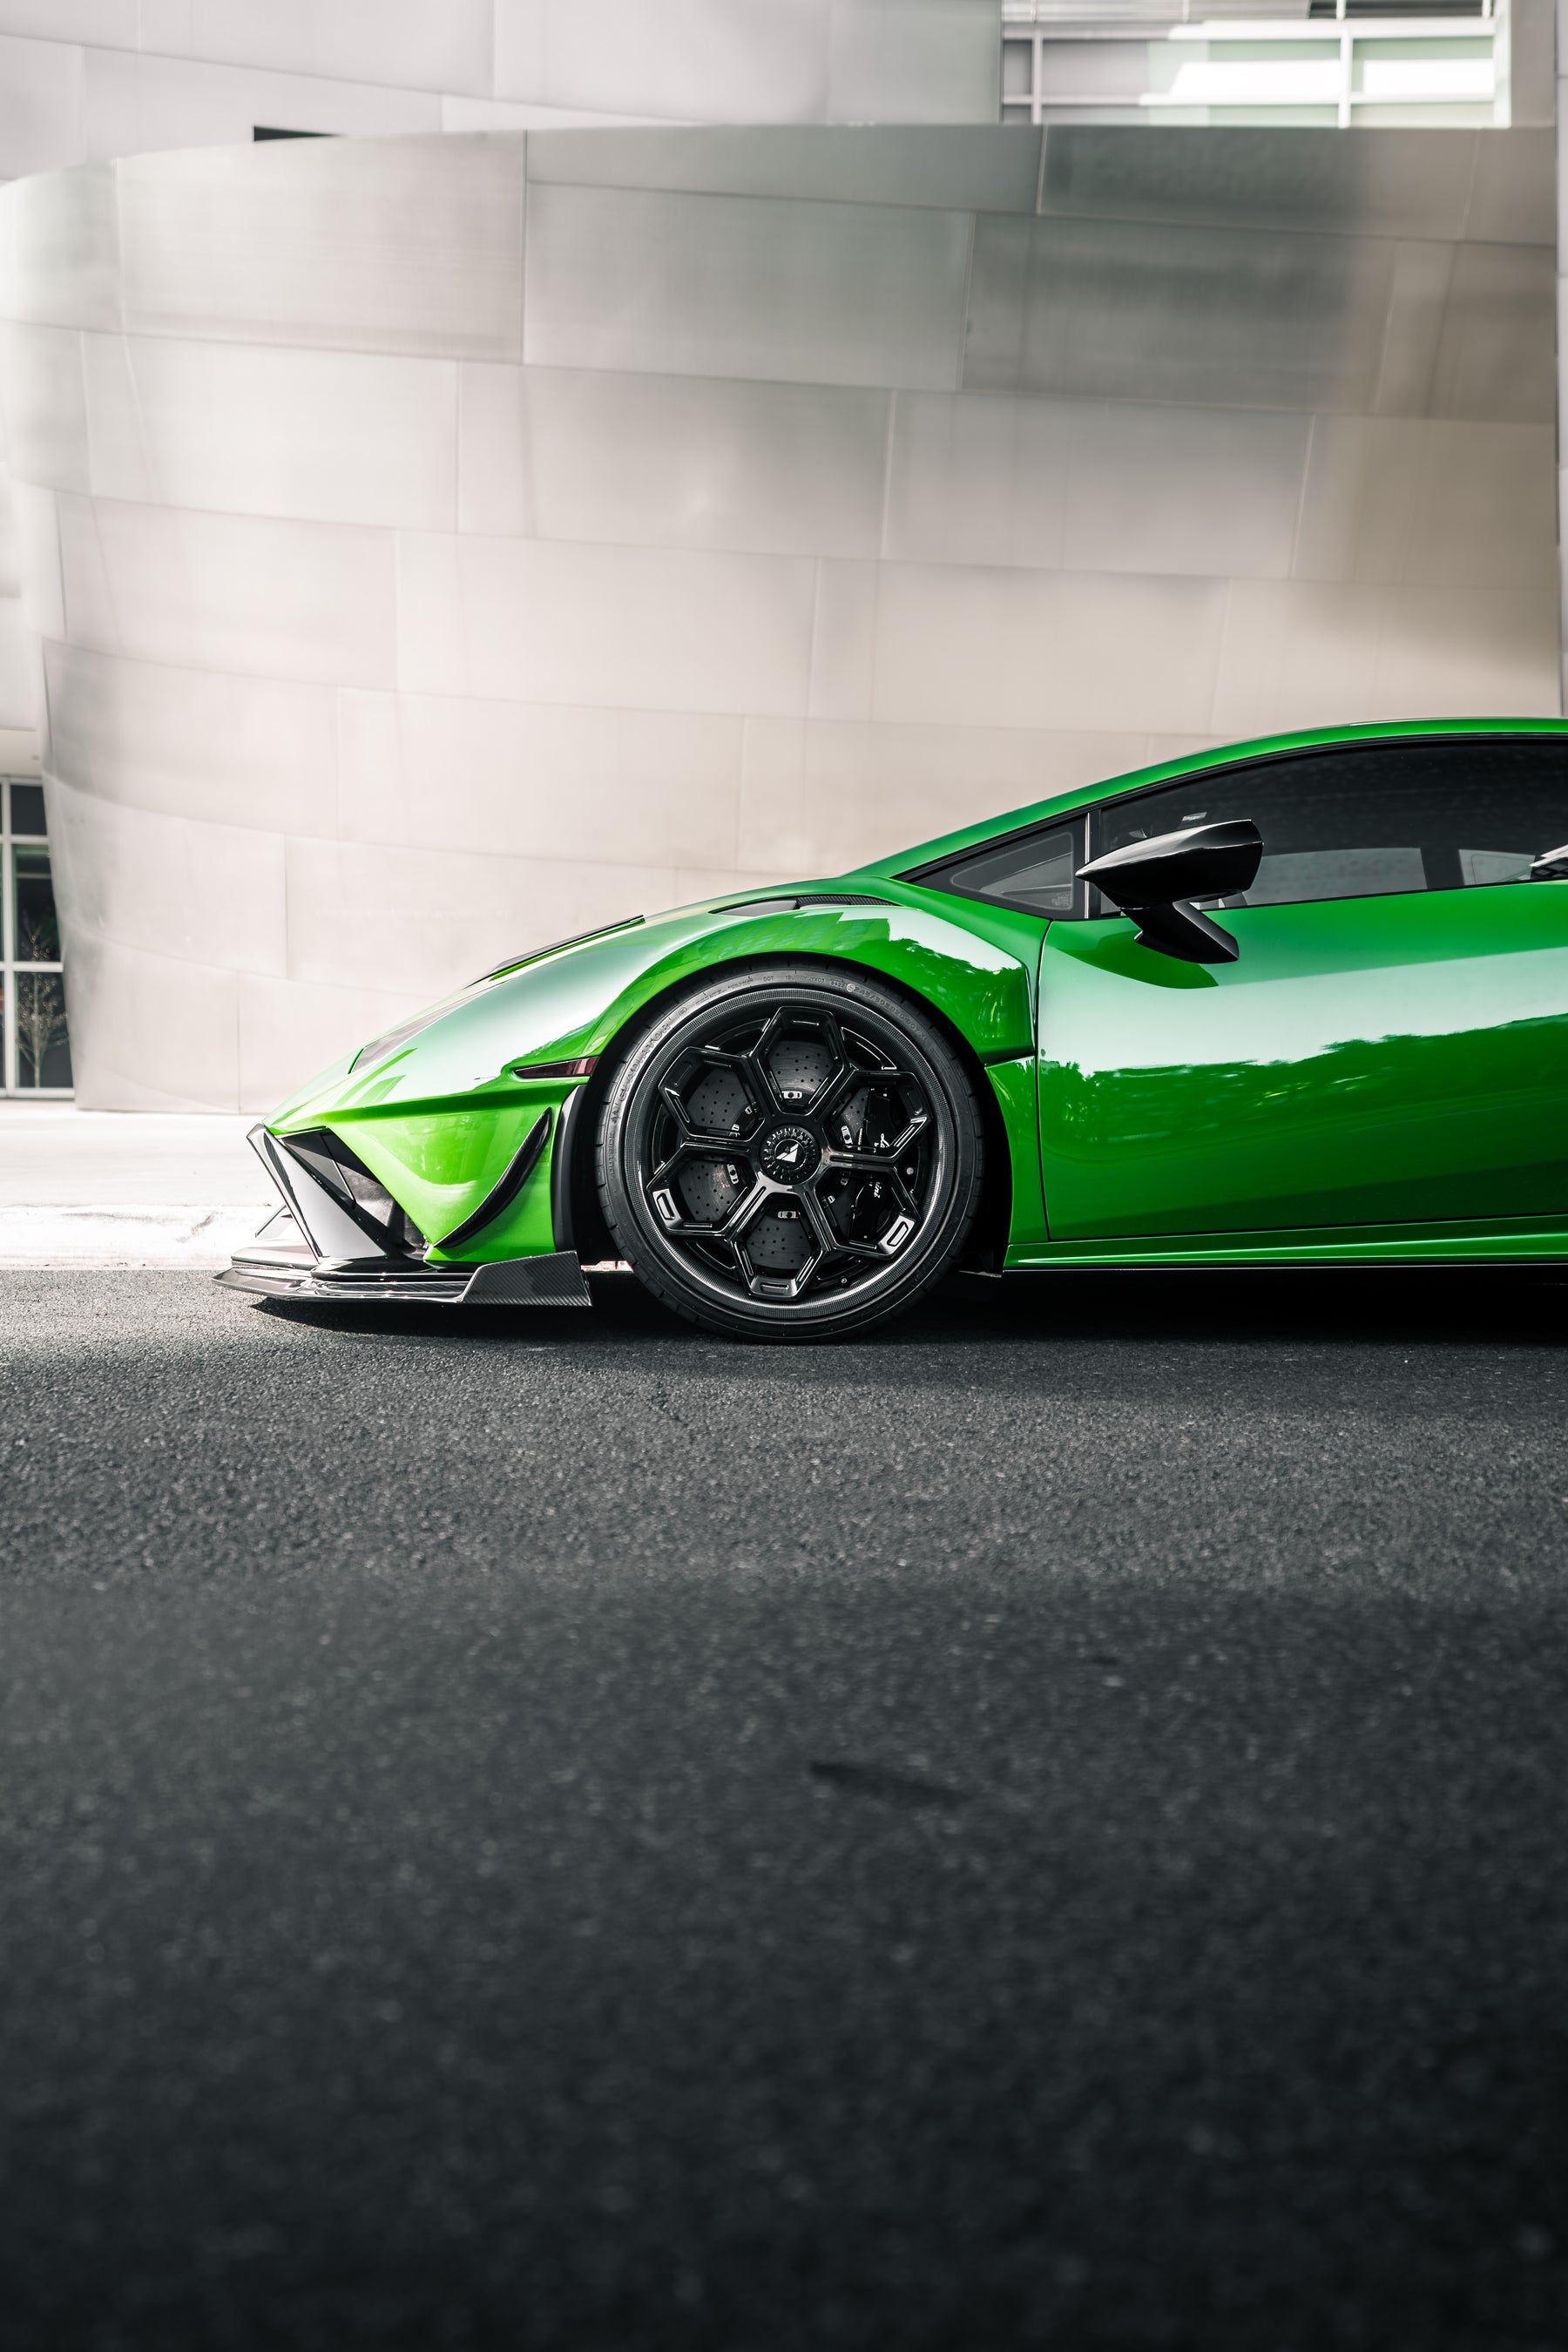 Lamborghini Huracan STO VC-322 Dymag Quick Delivery - Vorsteiner Wheels  -  - [tags]